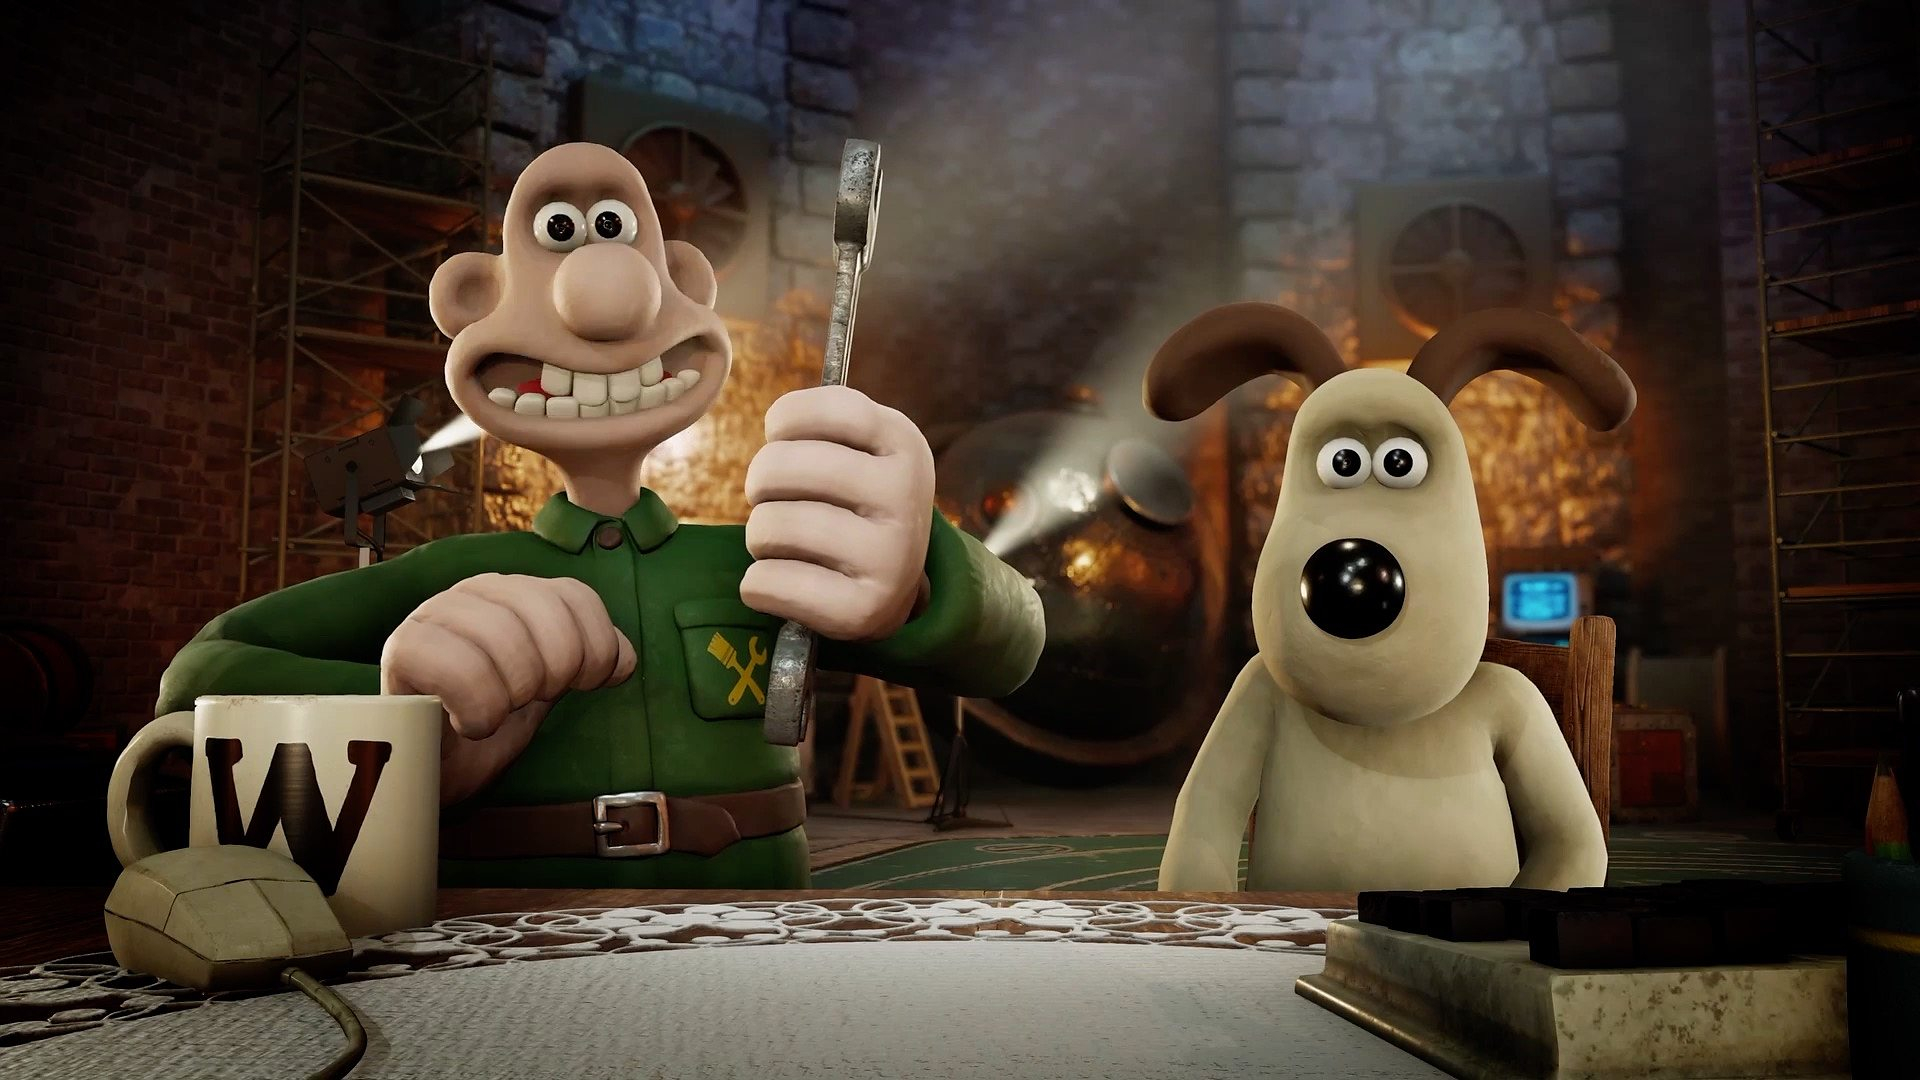 1920x1080 Wallace and Gromit clean up Bristol on new phone game BBC News